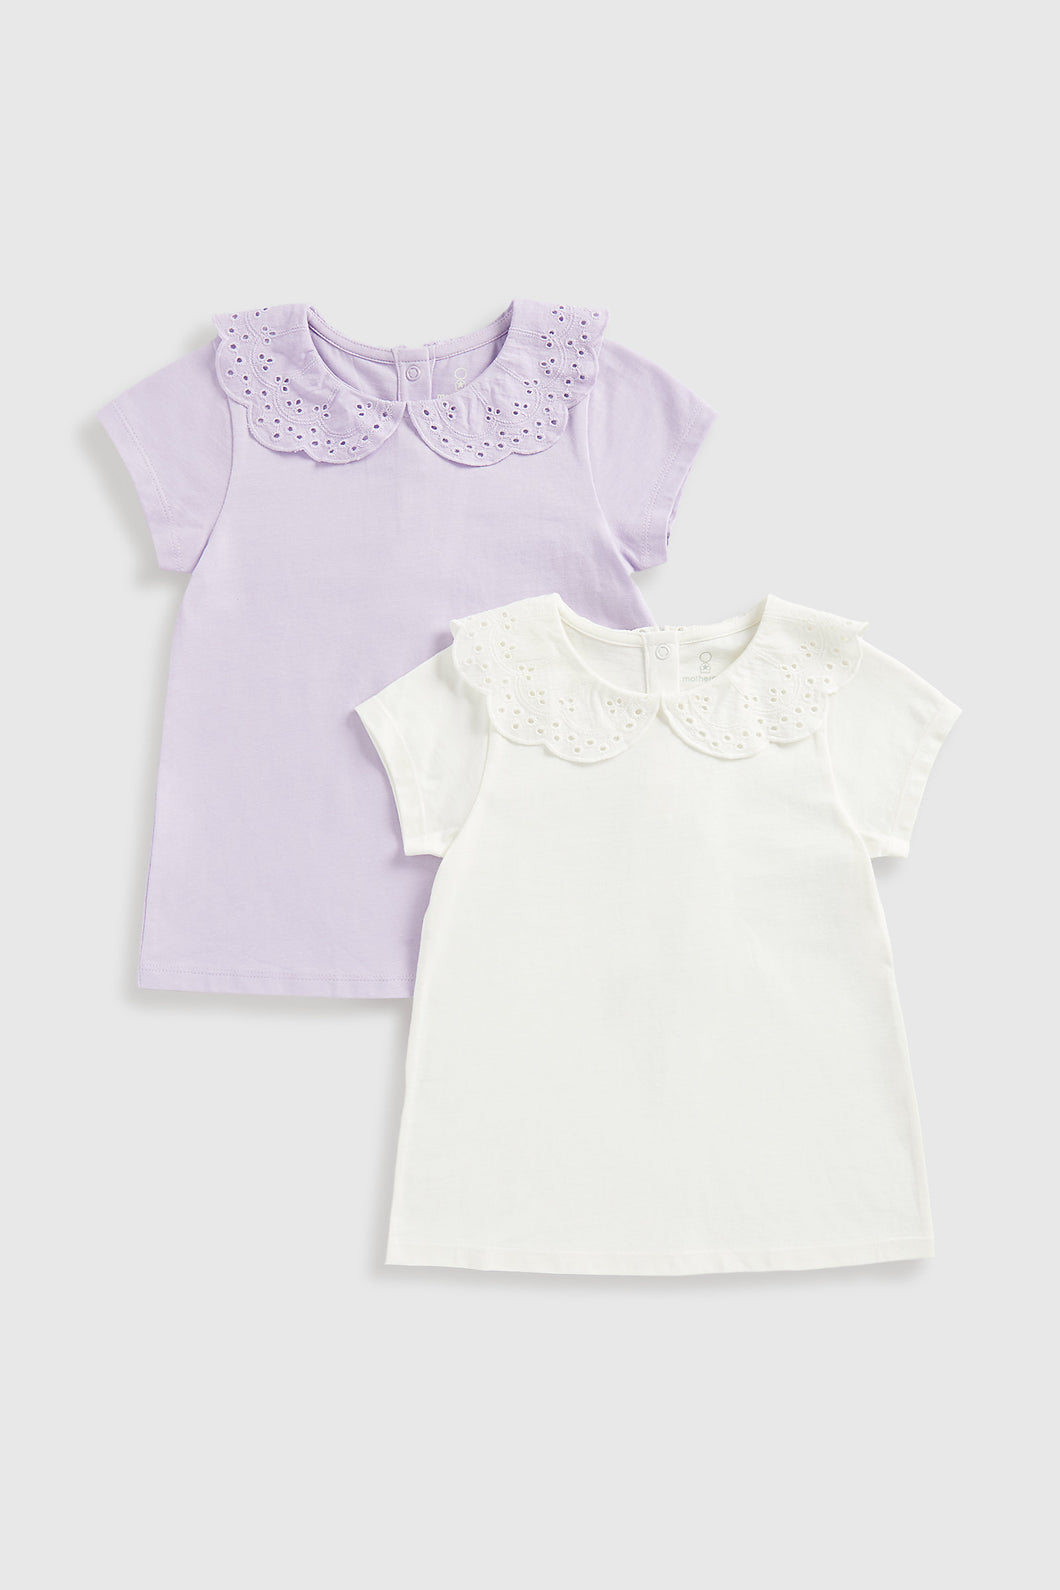 Mothercare Broderie Collar T-Shirts - 2 Pack